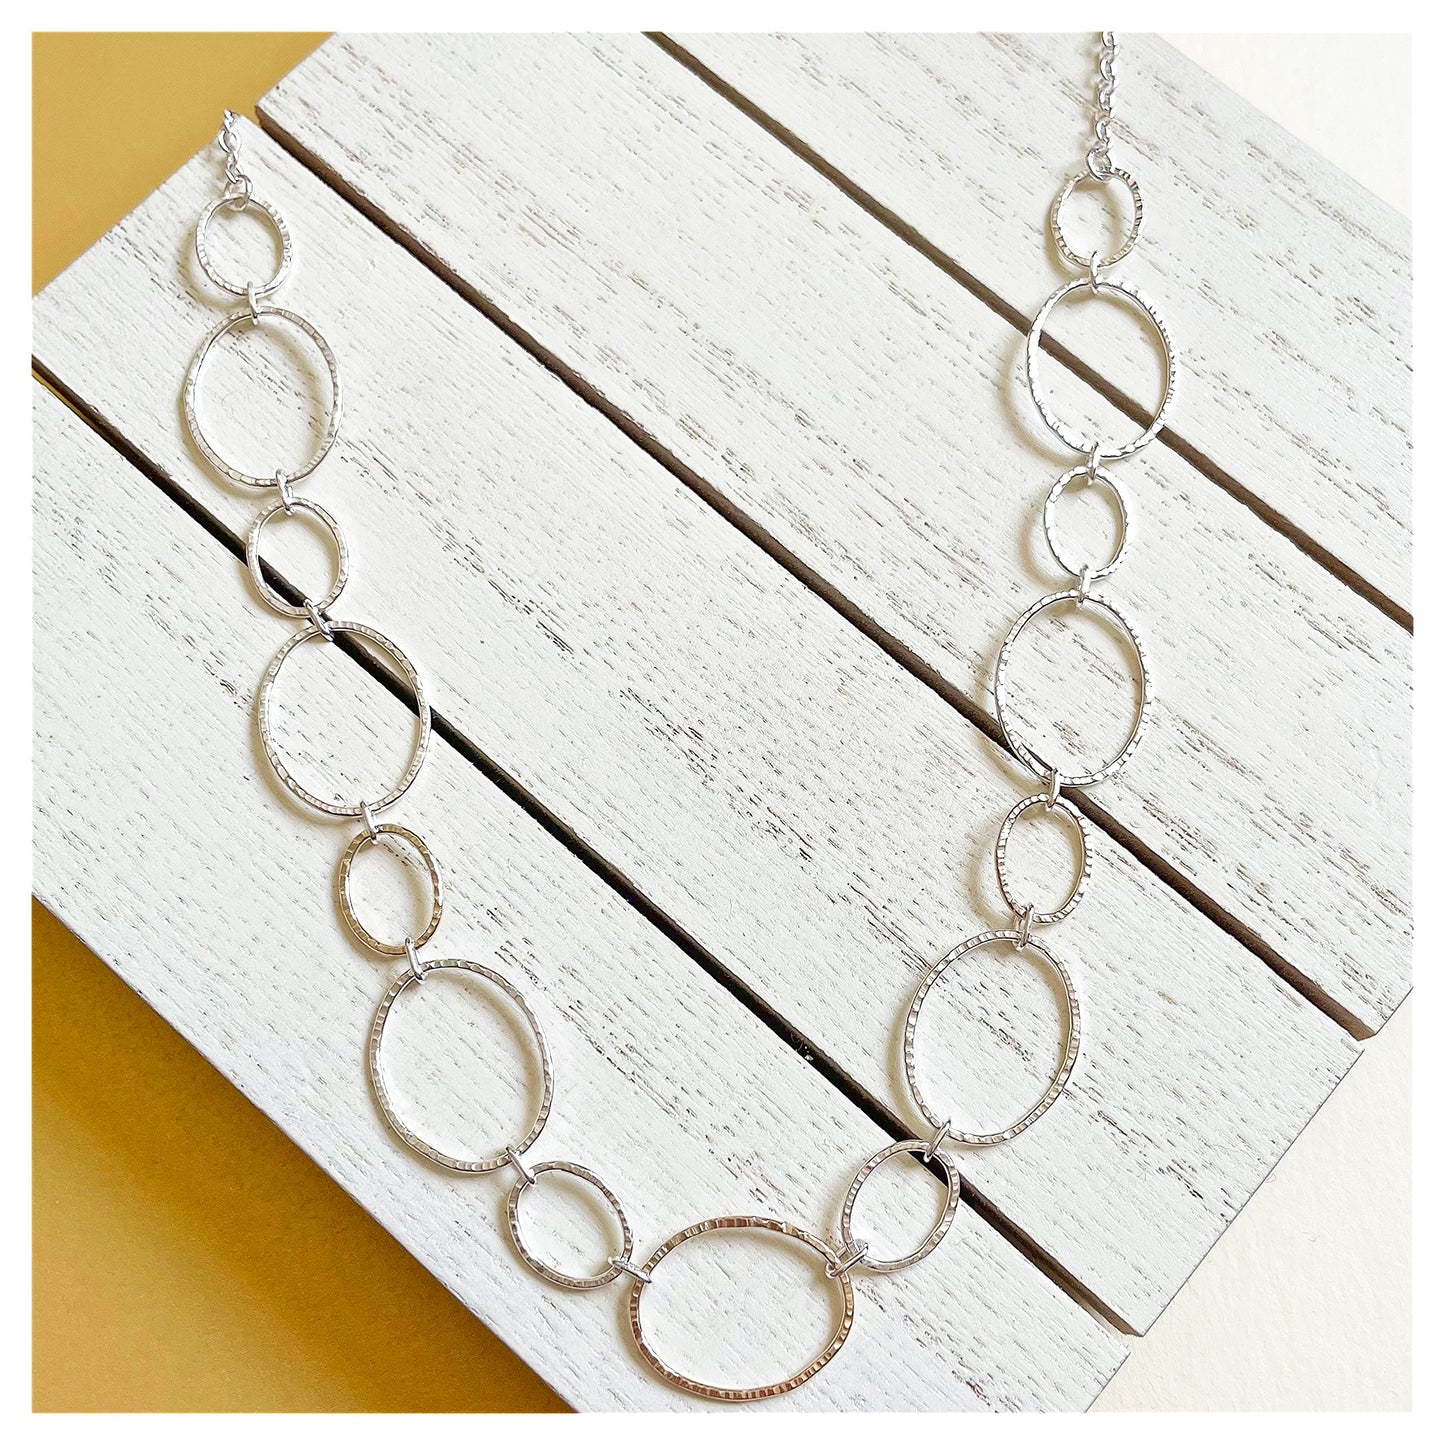 9ct Yellow Gold and Sterling Silver Oval Link Handmade Chain.